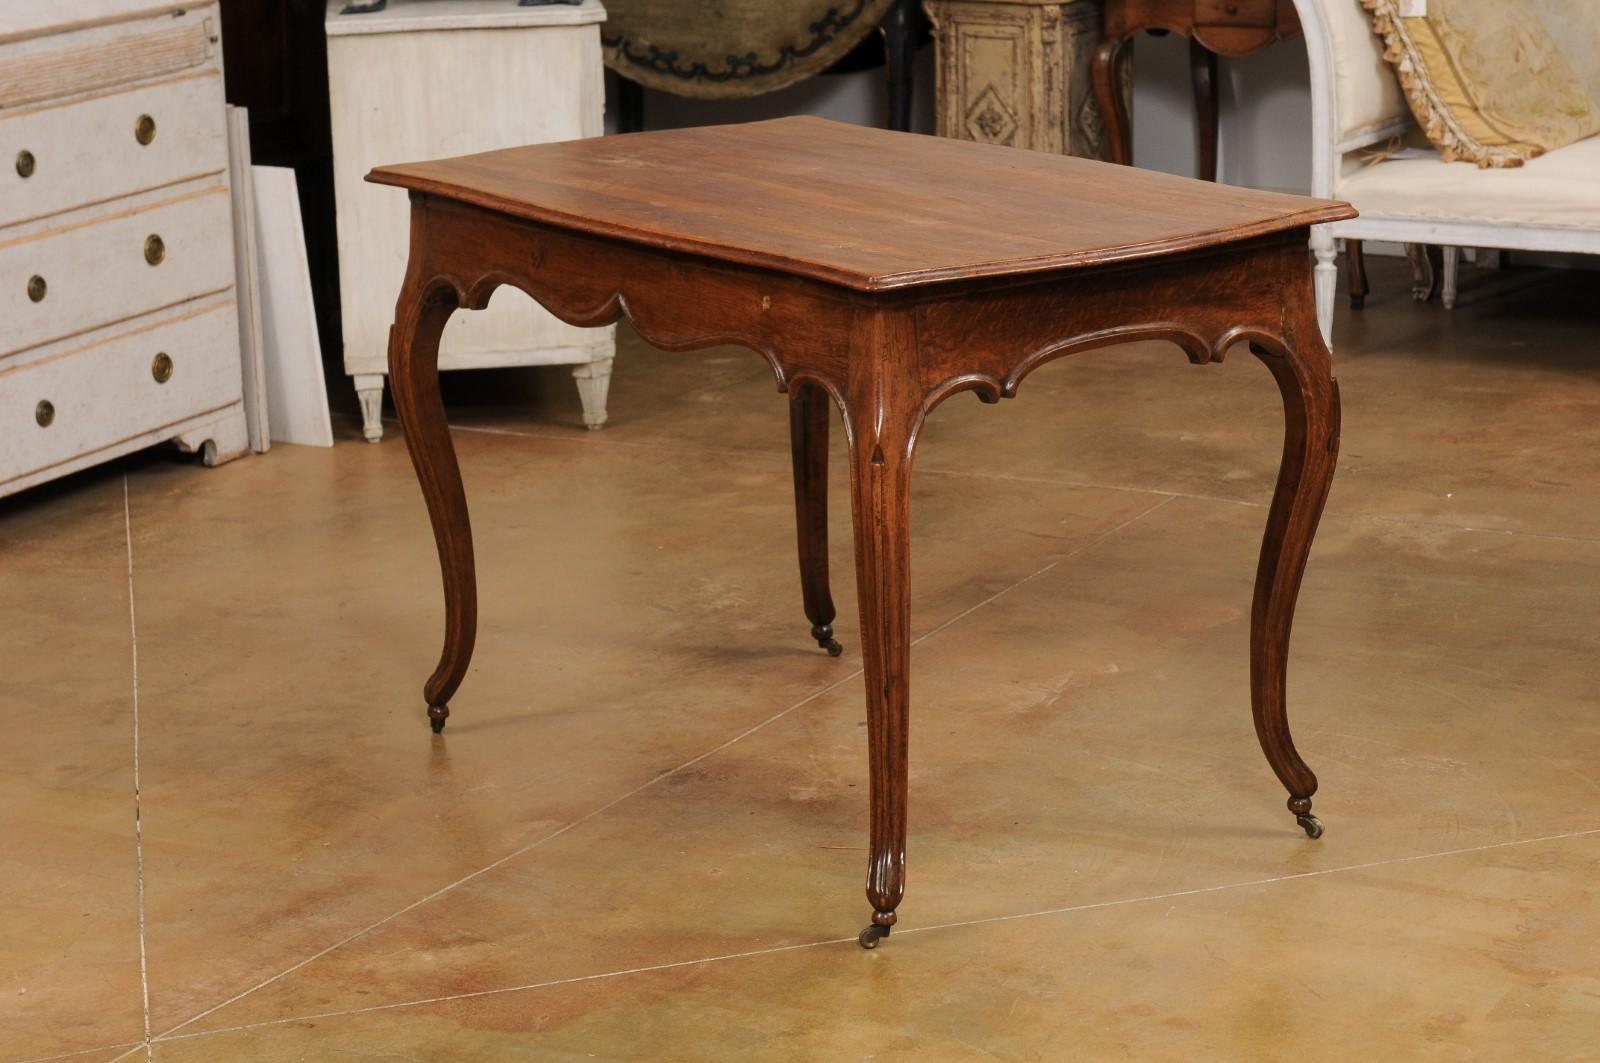 Italian Rococo Early 19th Century Oak Table with Carved Apron and Cabriole Legs For Sale 6